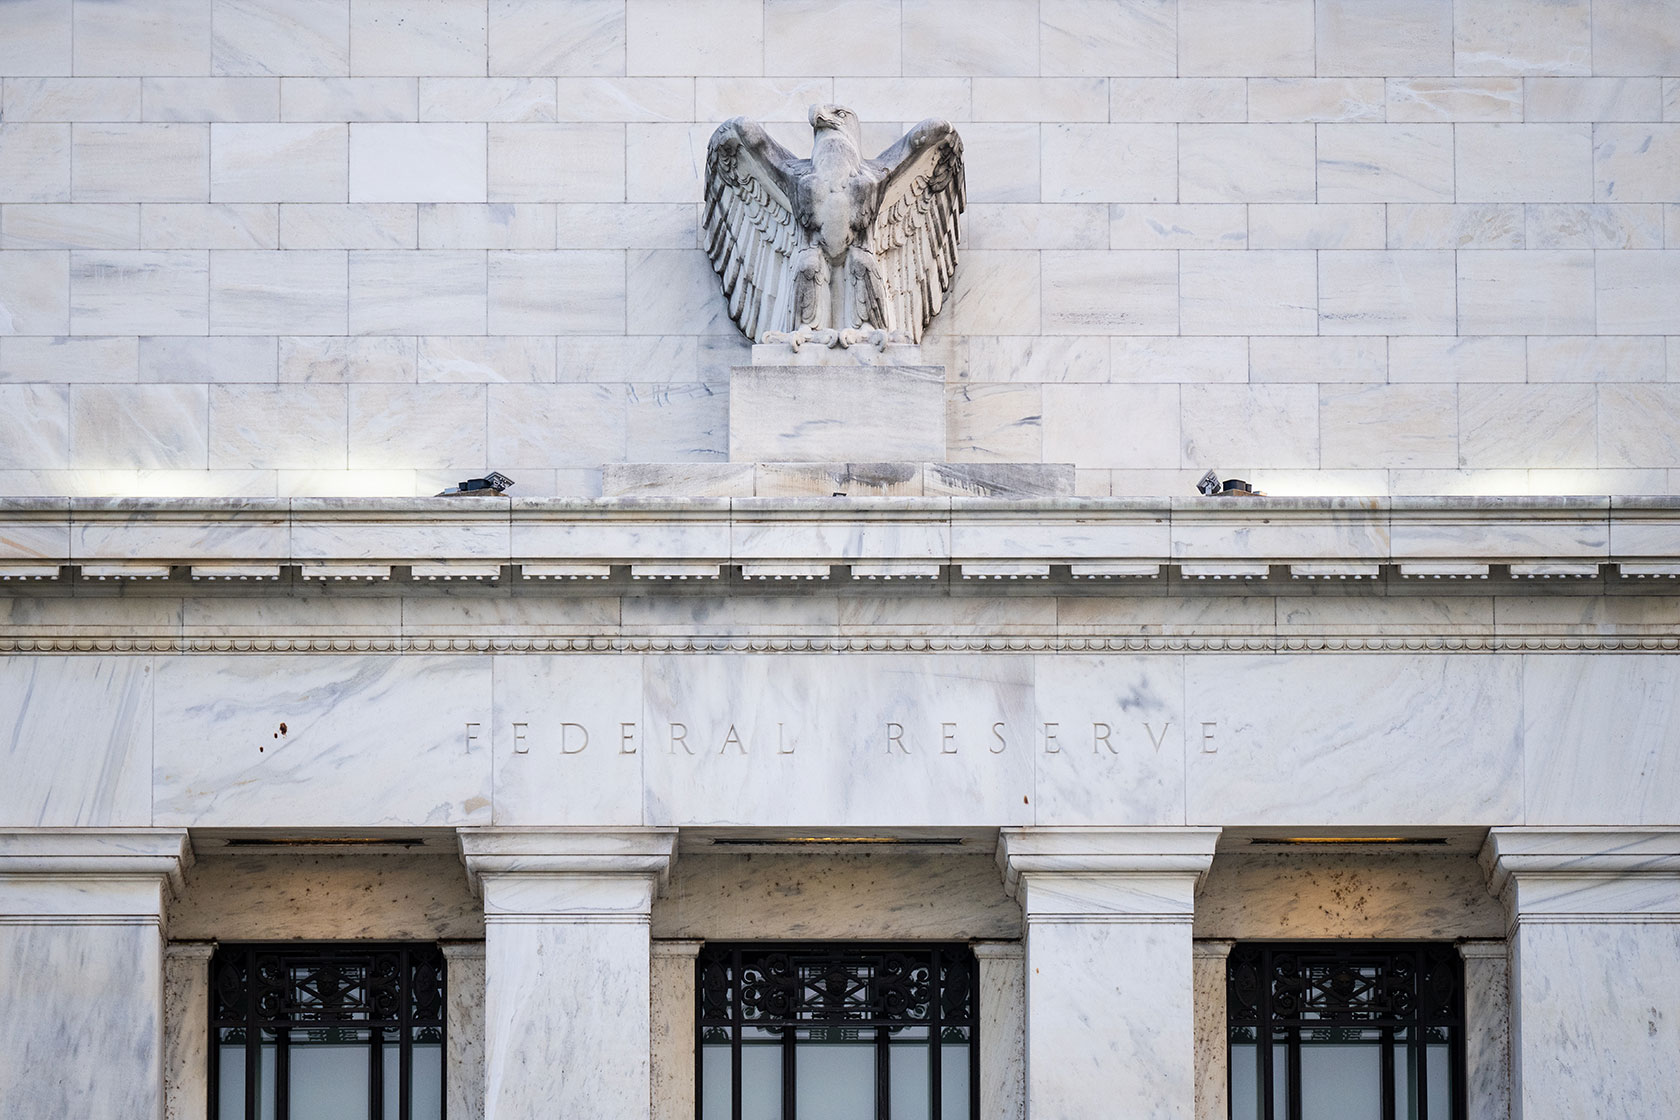 Photo shows the marble facade of the Federal Reserve, with the sculpture of an eagle at center.